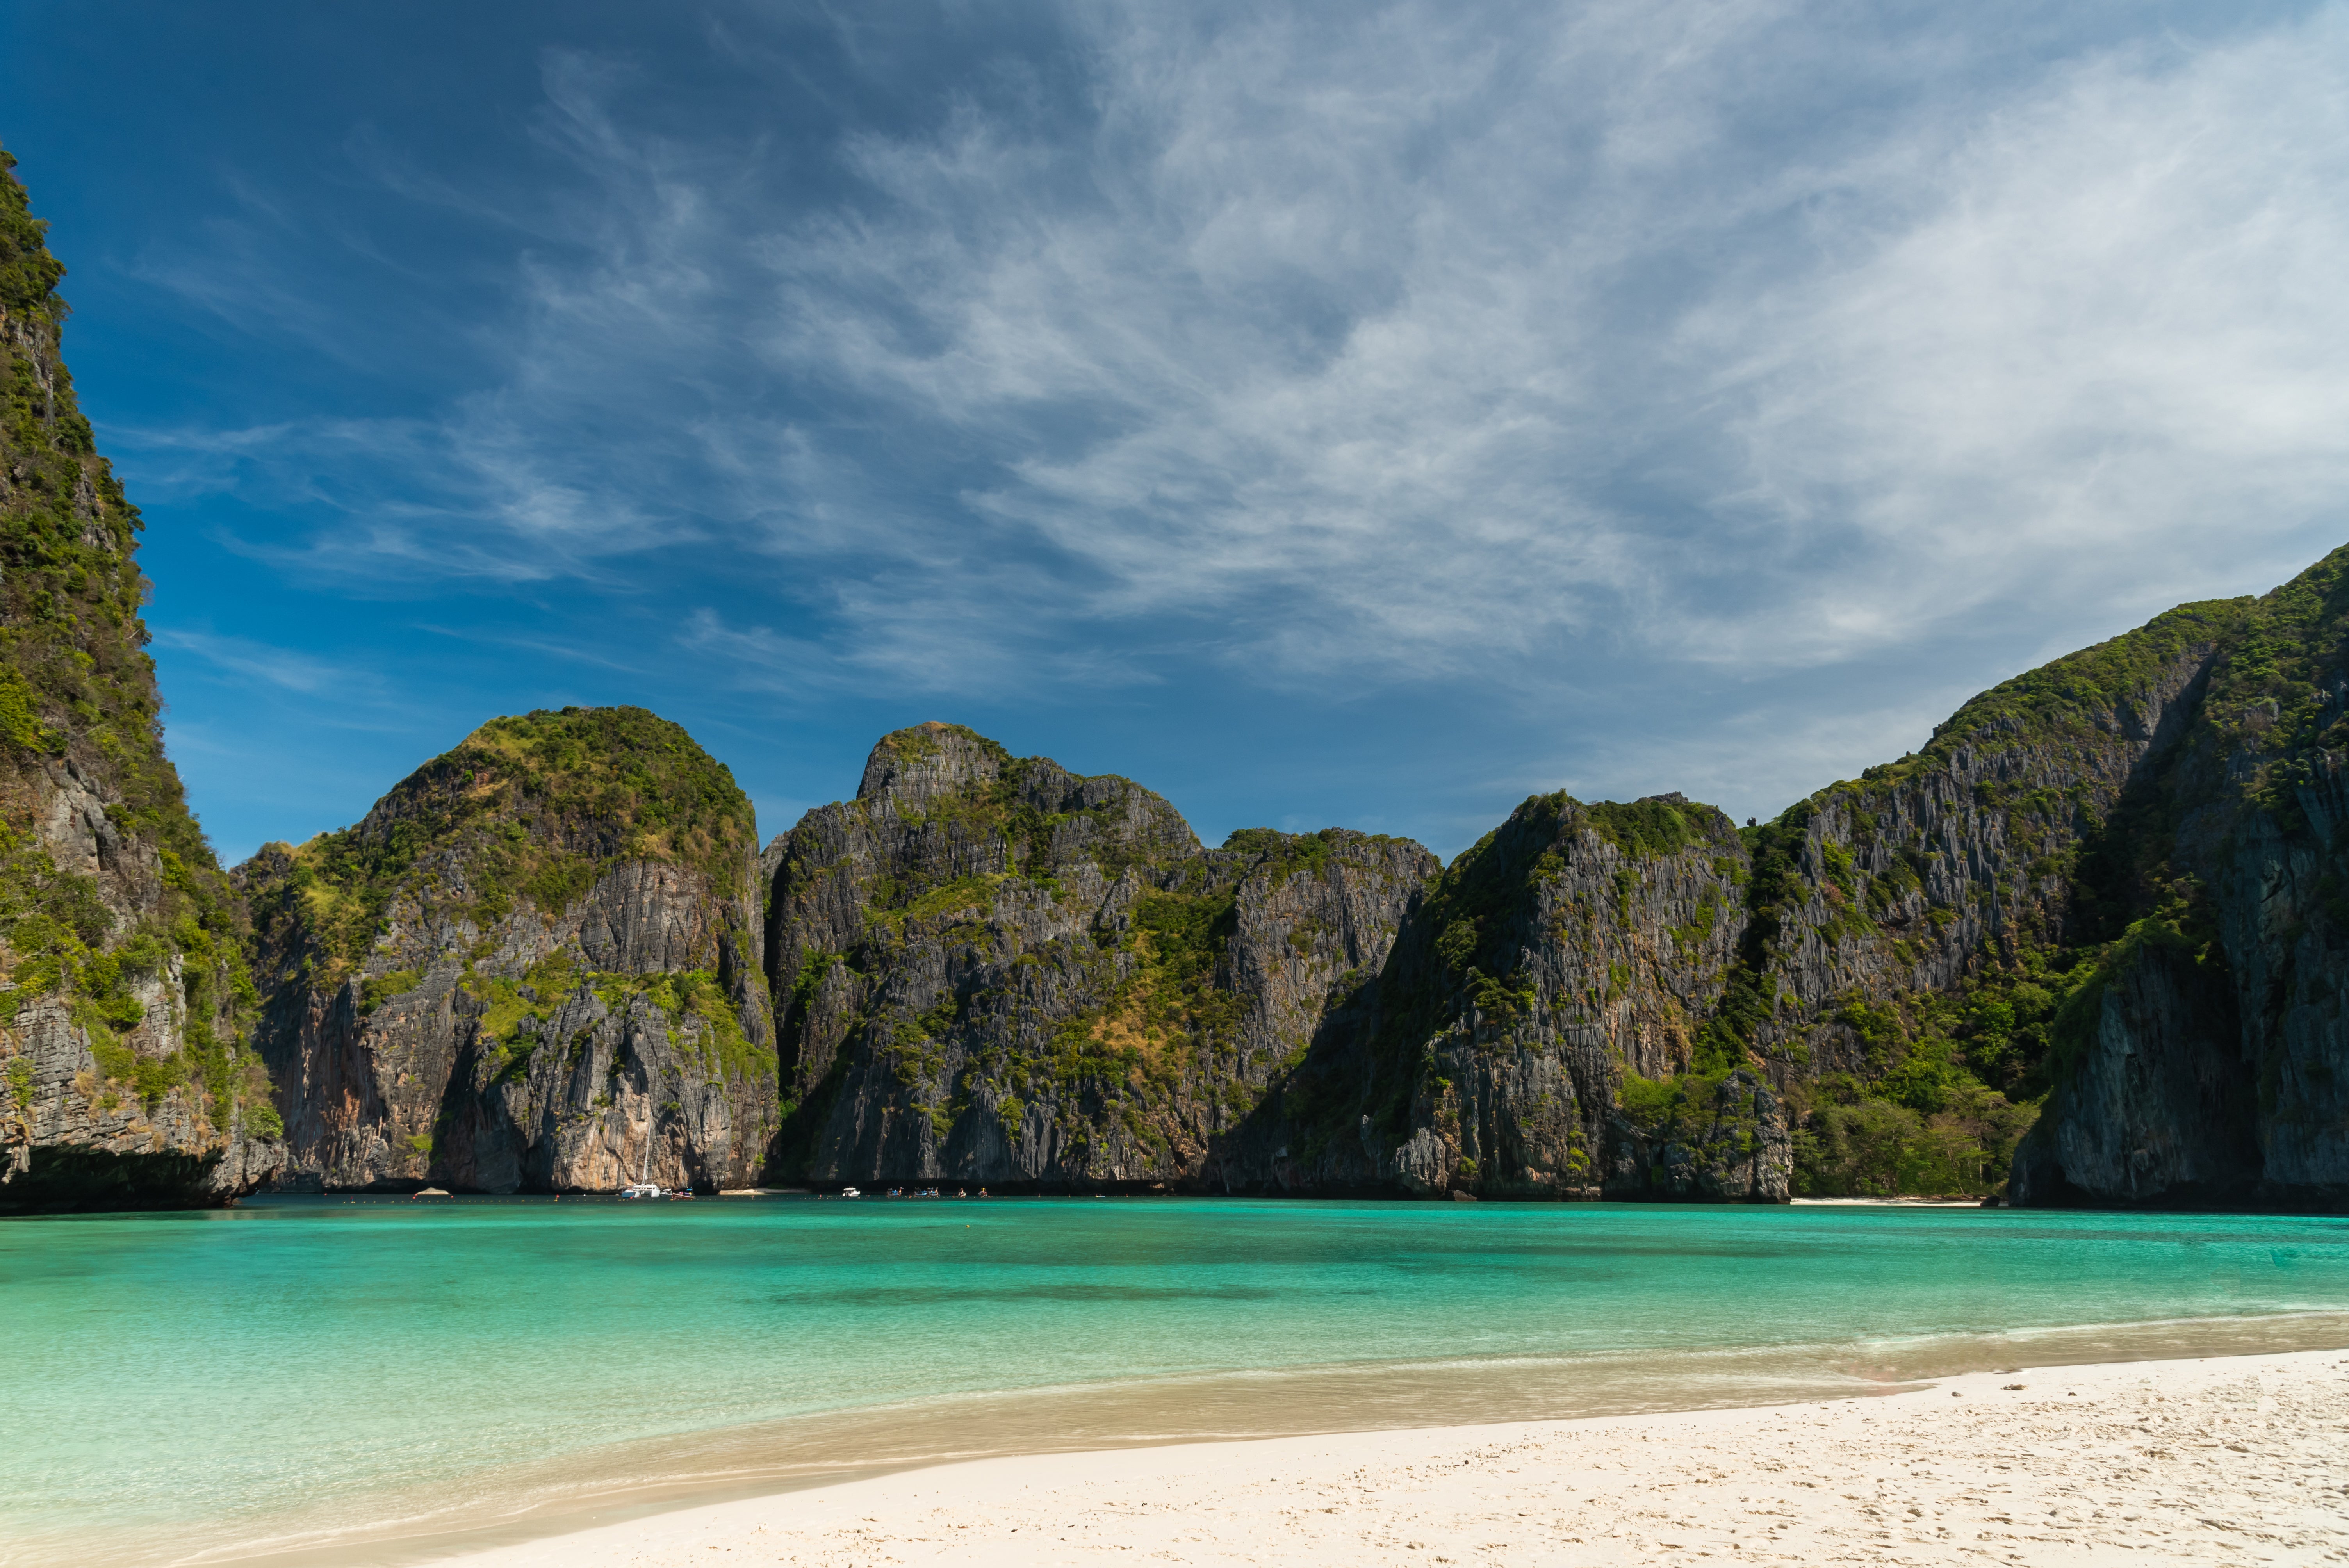 Maya Bay is a popular tourist destination for fans of ‘The Beach’ film